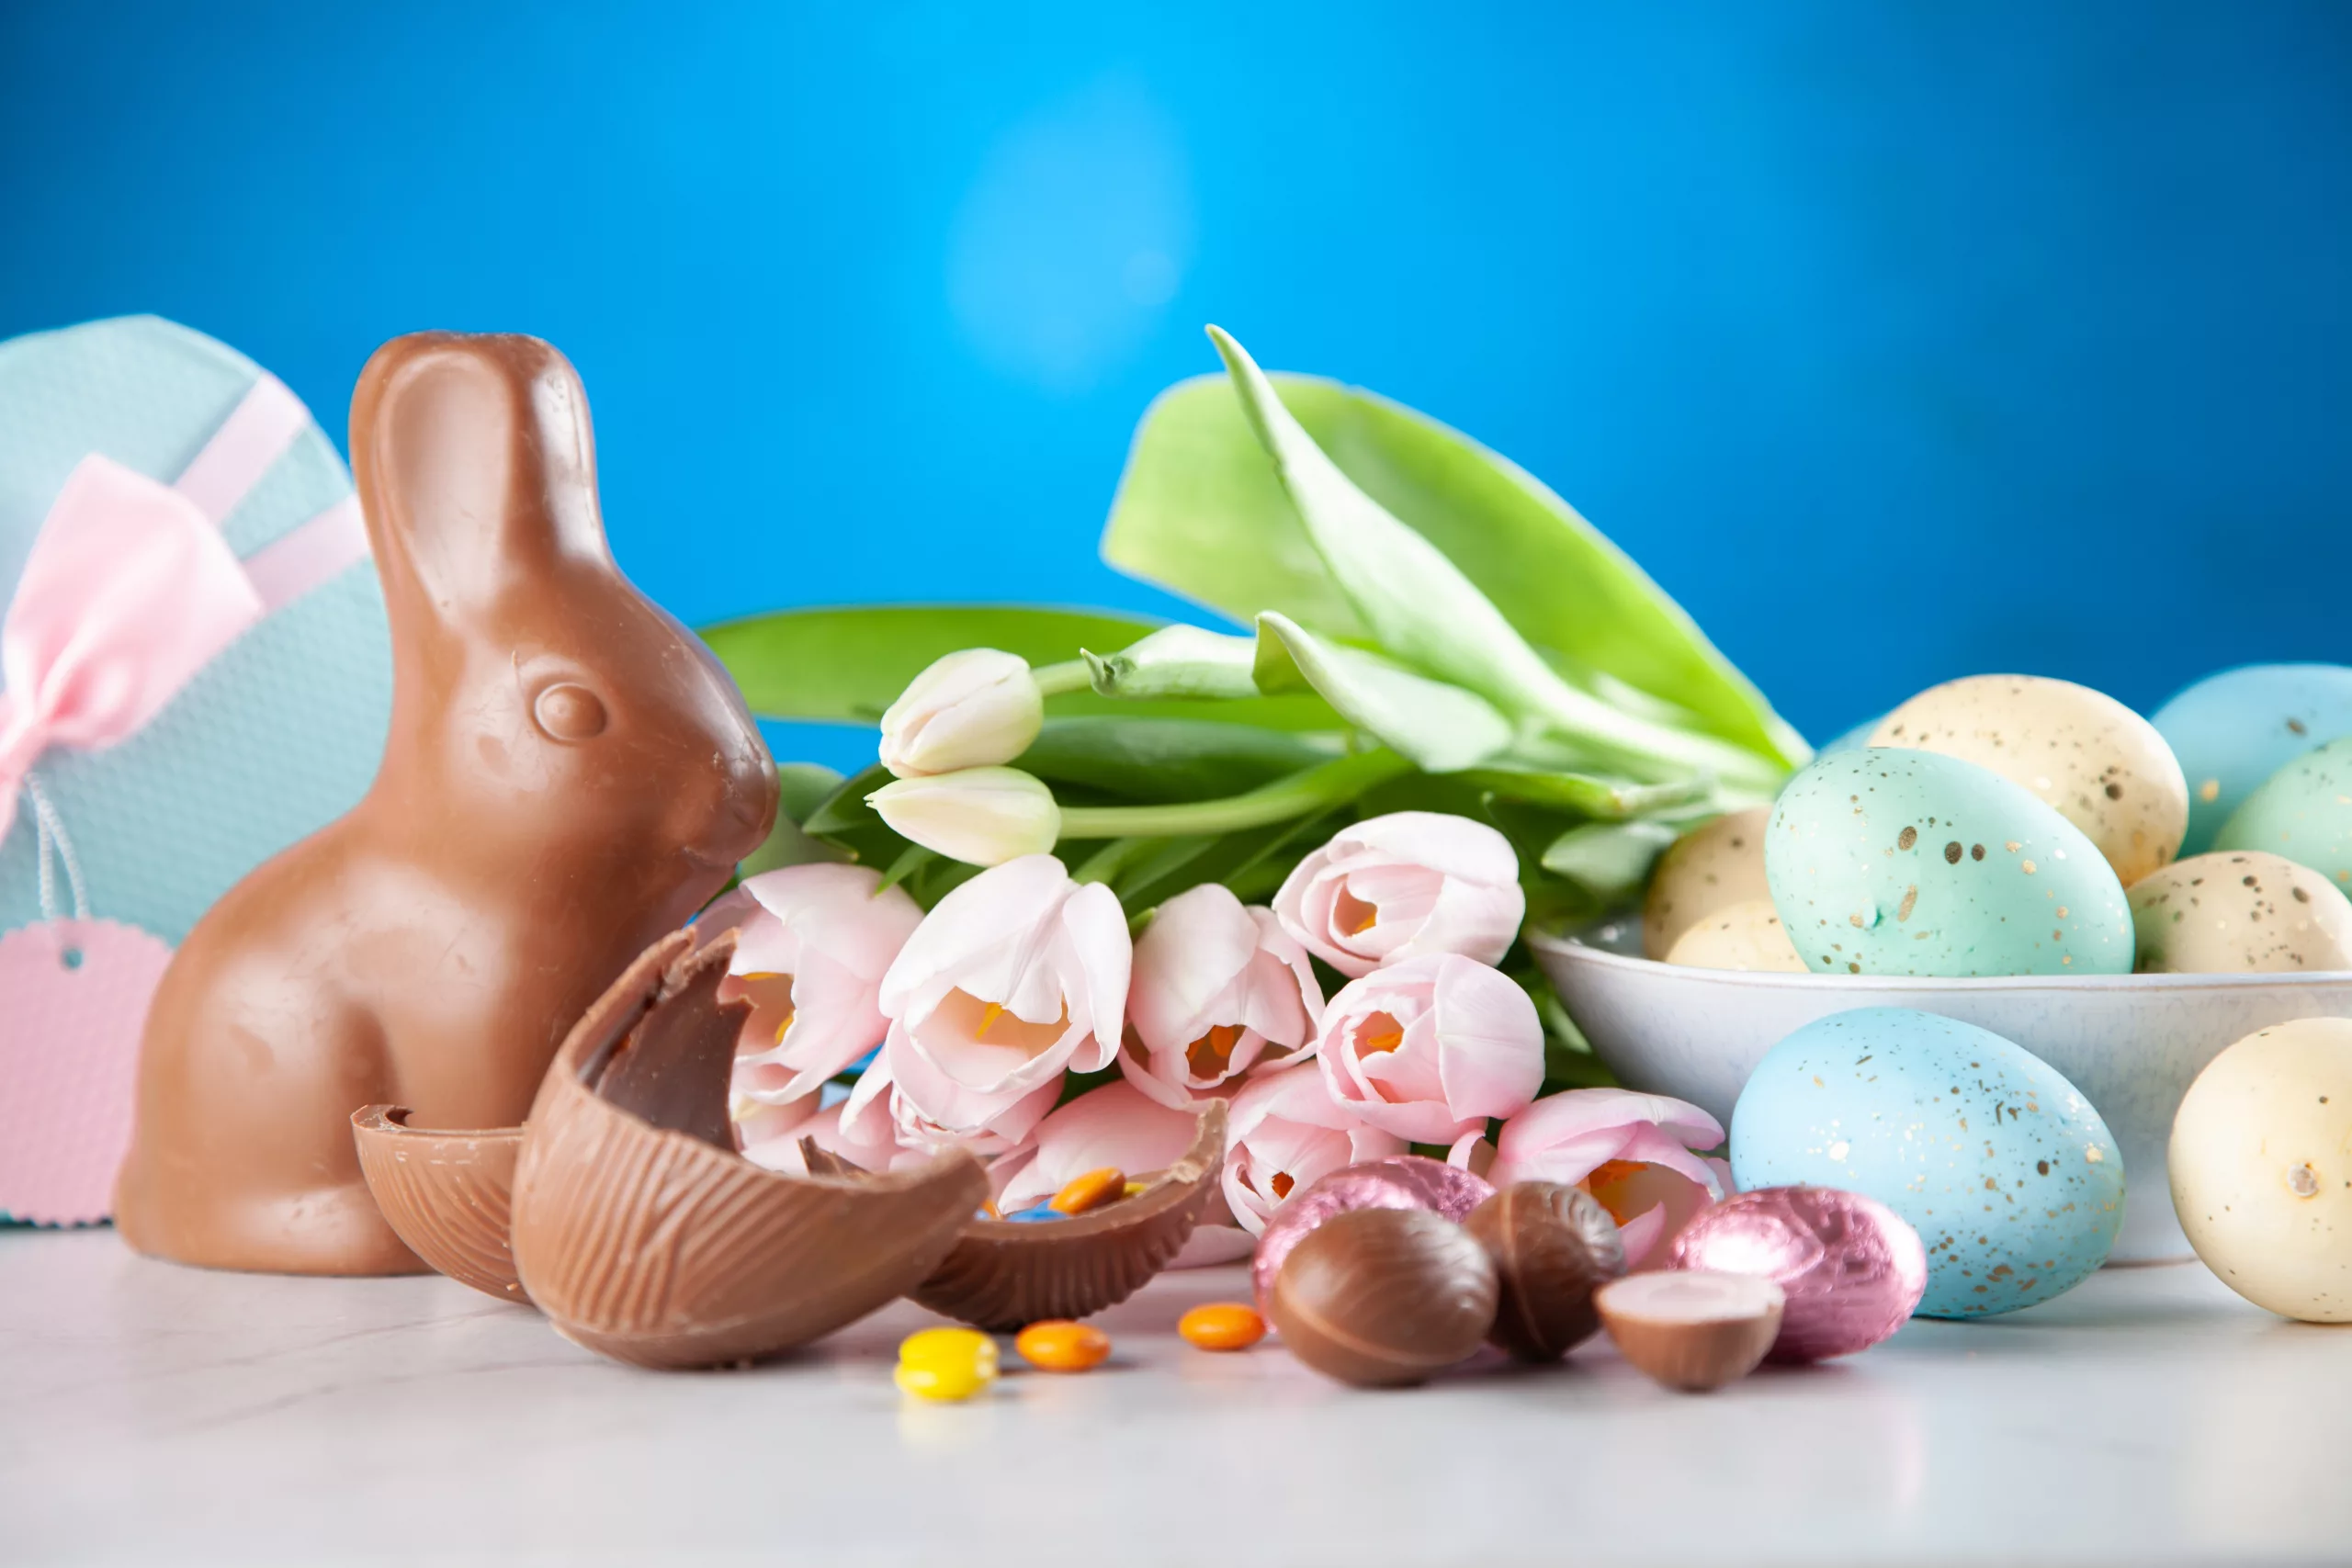 Picture of chocolate Easter bunny and candy eggs.